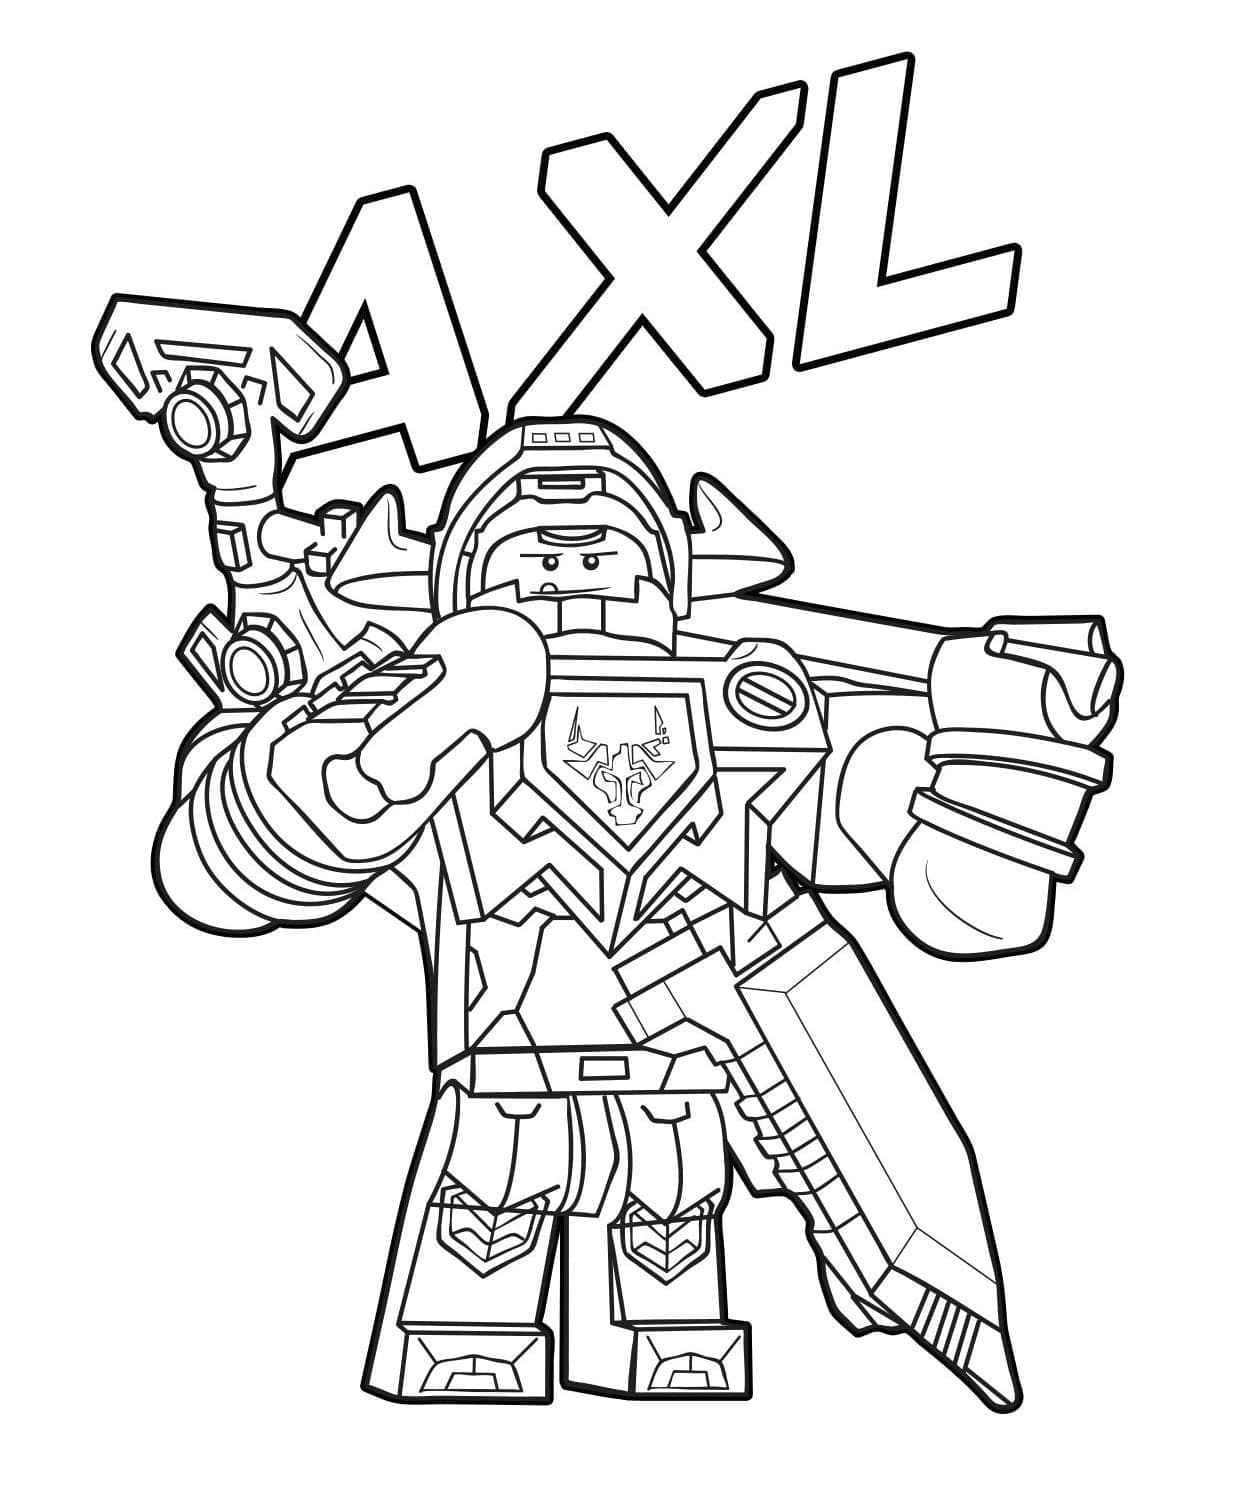 Lego Nexo Knights Axl coloring page